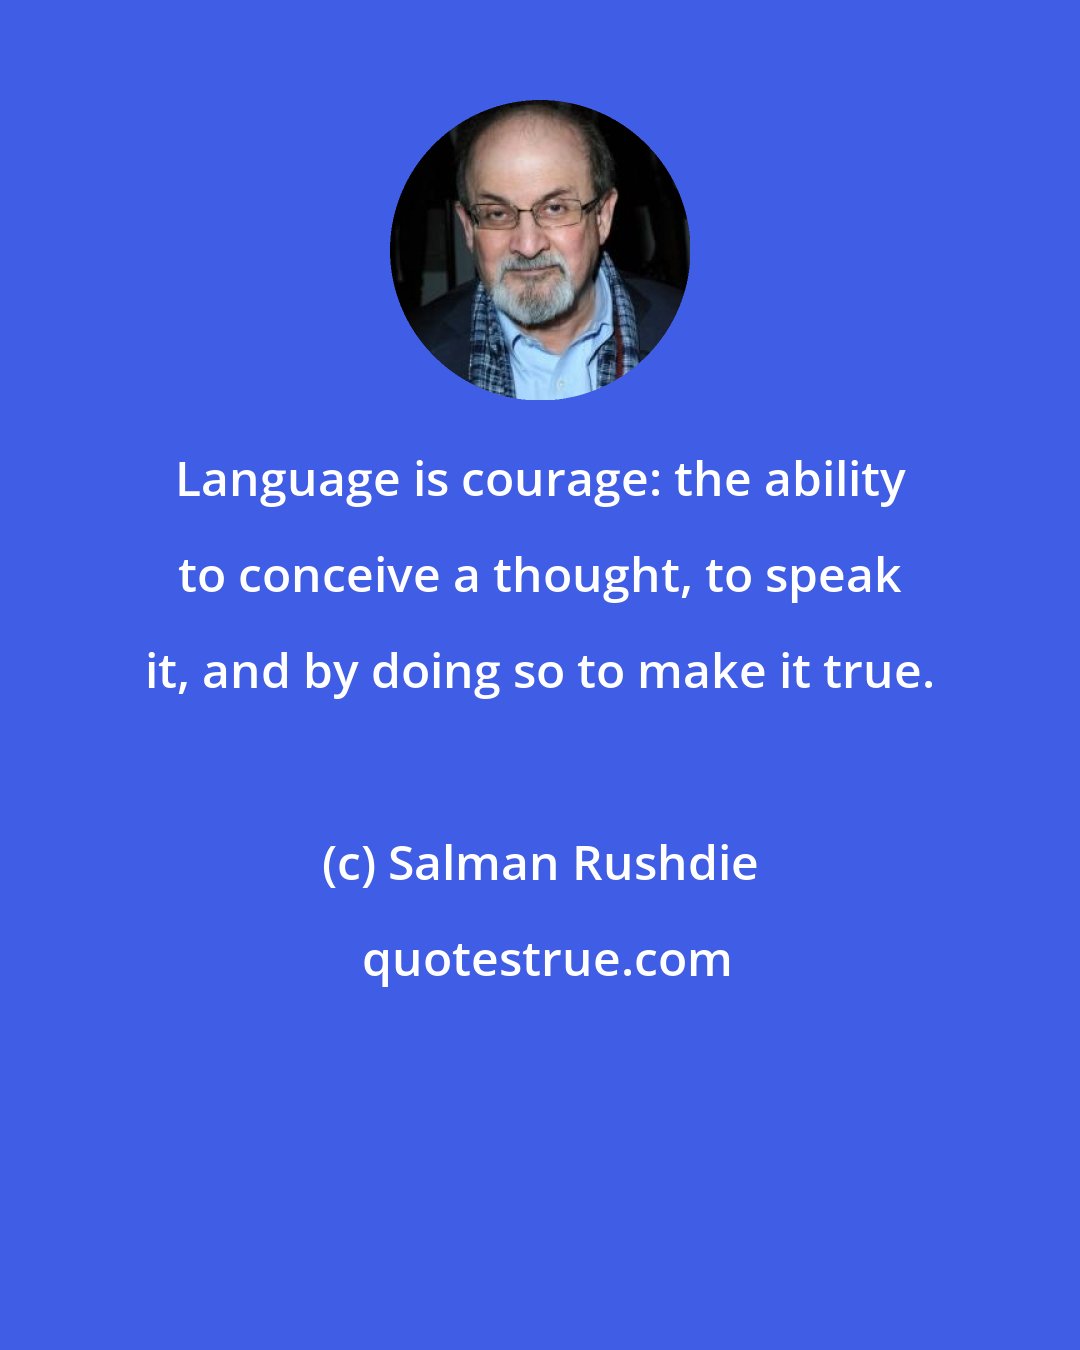 Salman Rushdie: Language is courage: the ability to conceive a thought, to speak it, and by doing so to make it true.